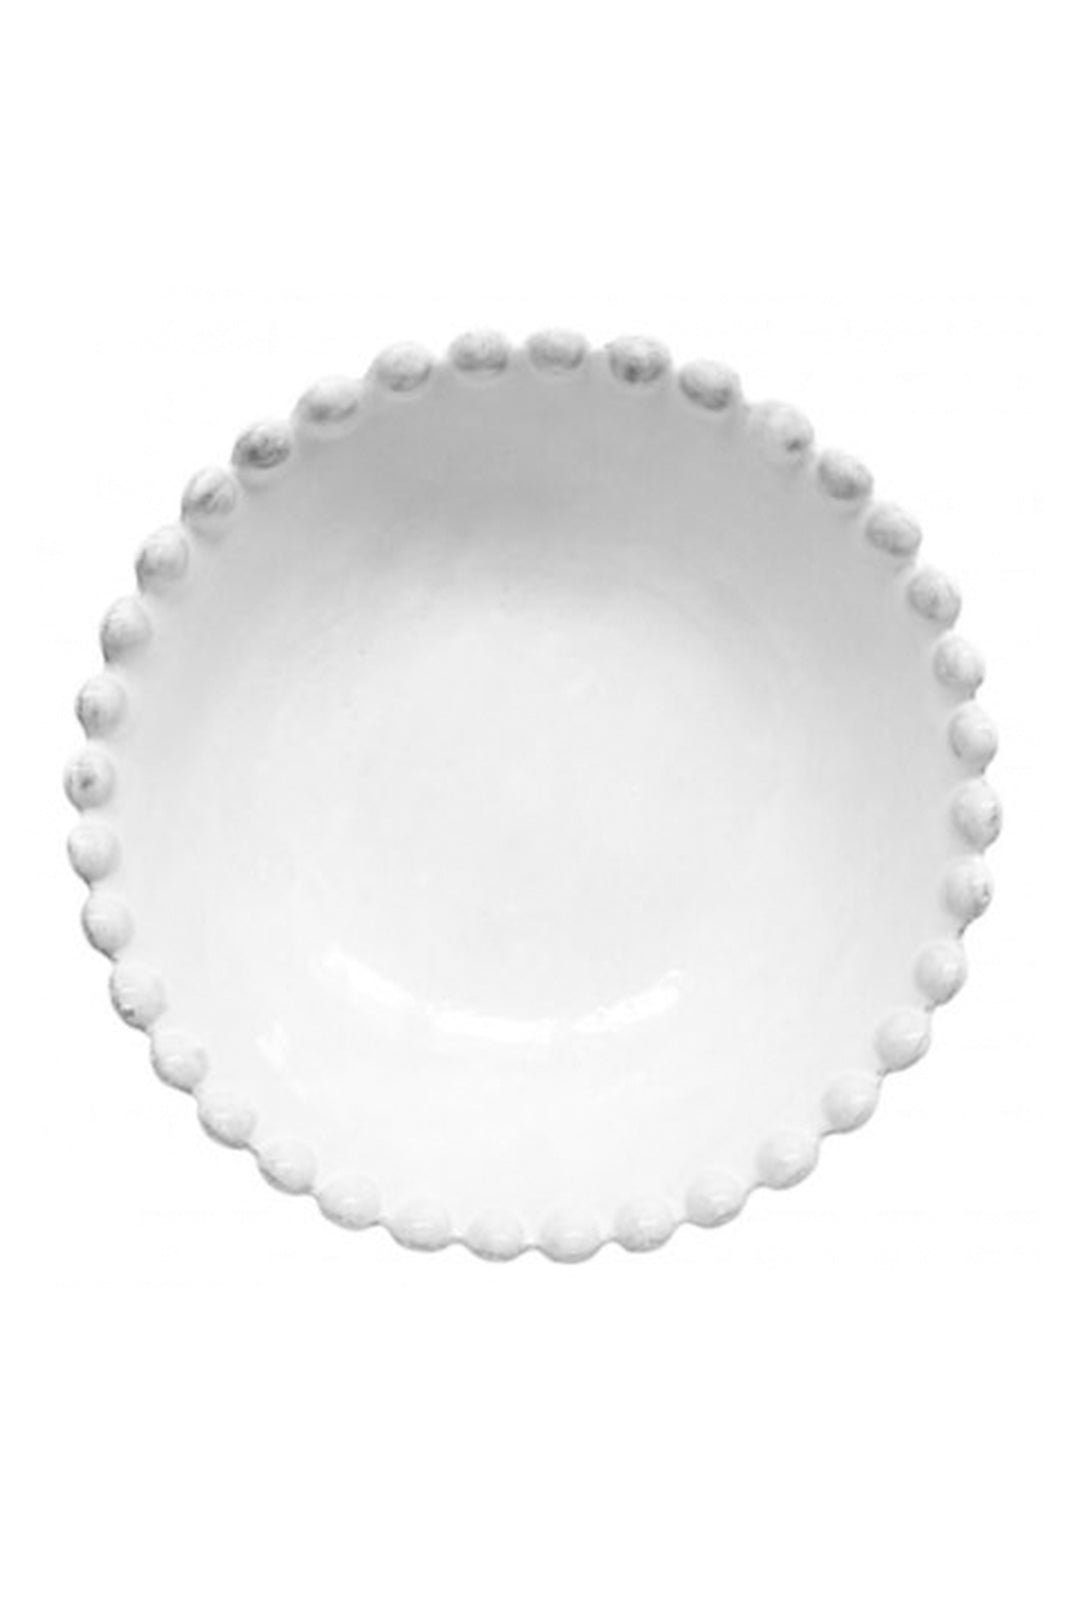 Adelaide Soup Plate